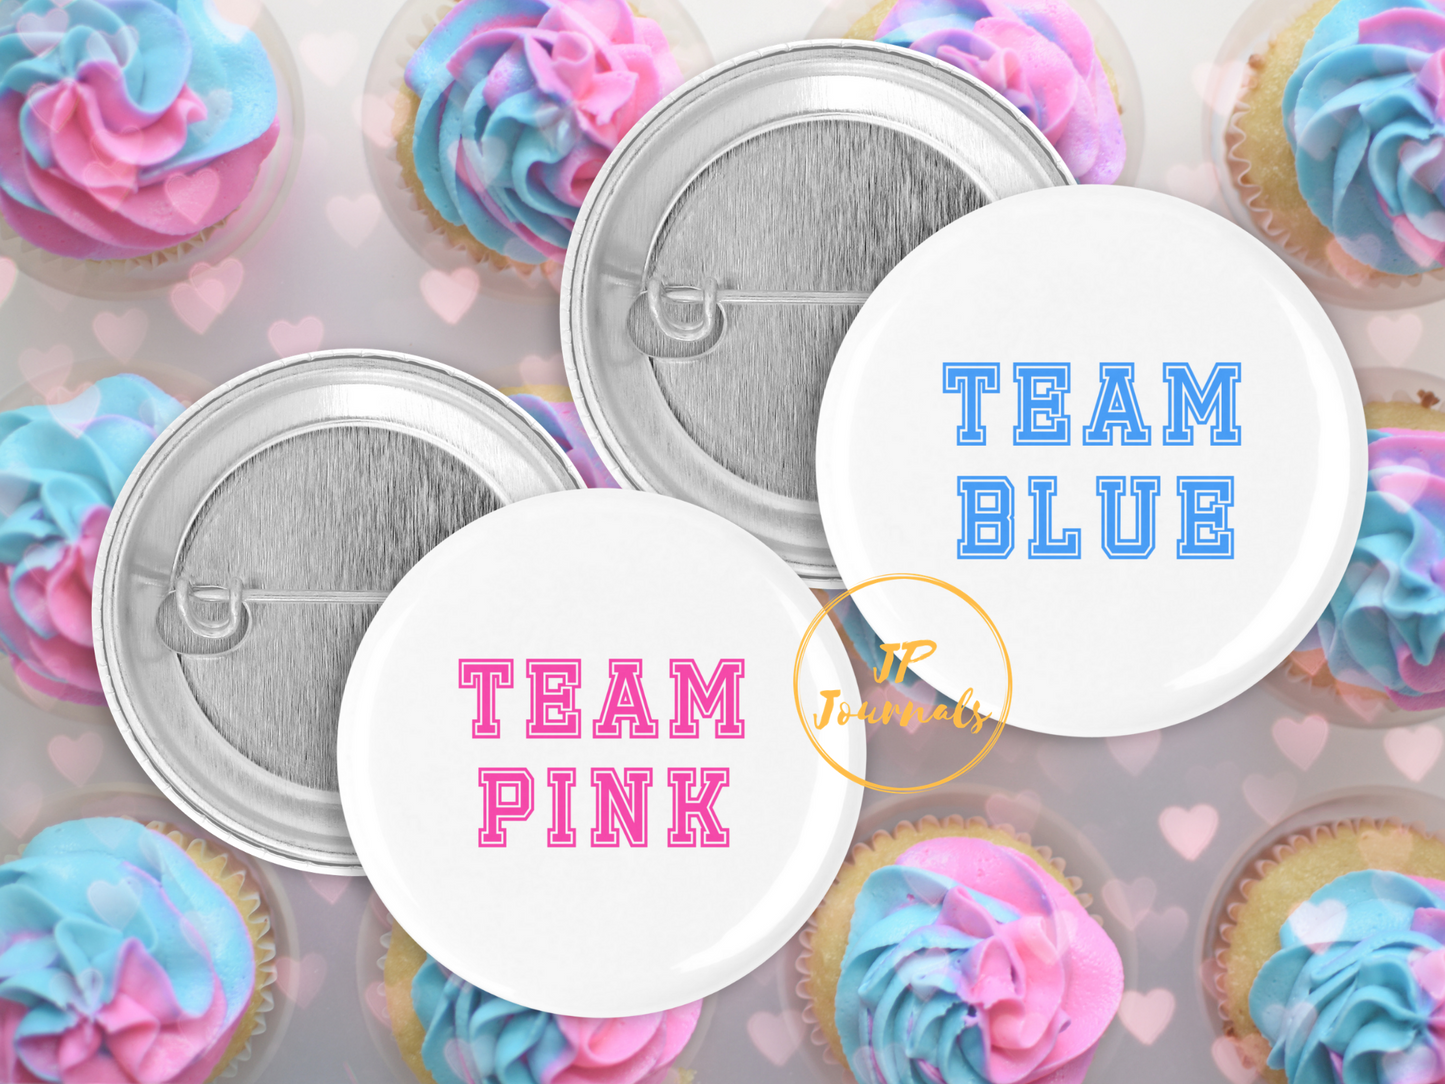 Baby Gender Reveal Party Pin Buttons, Team Pink Team Blue Pin Back Button Party Favor